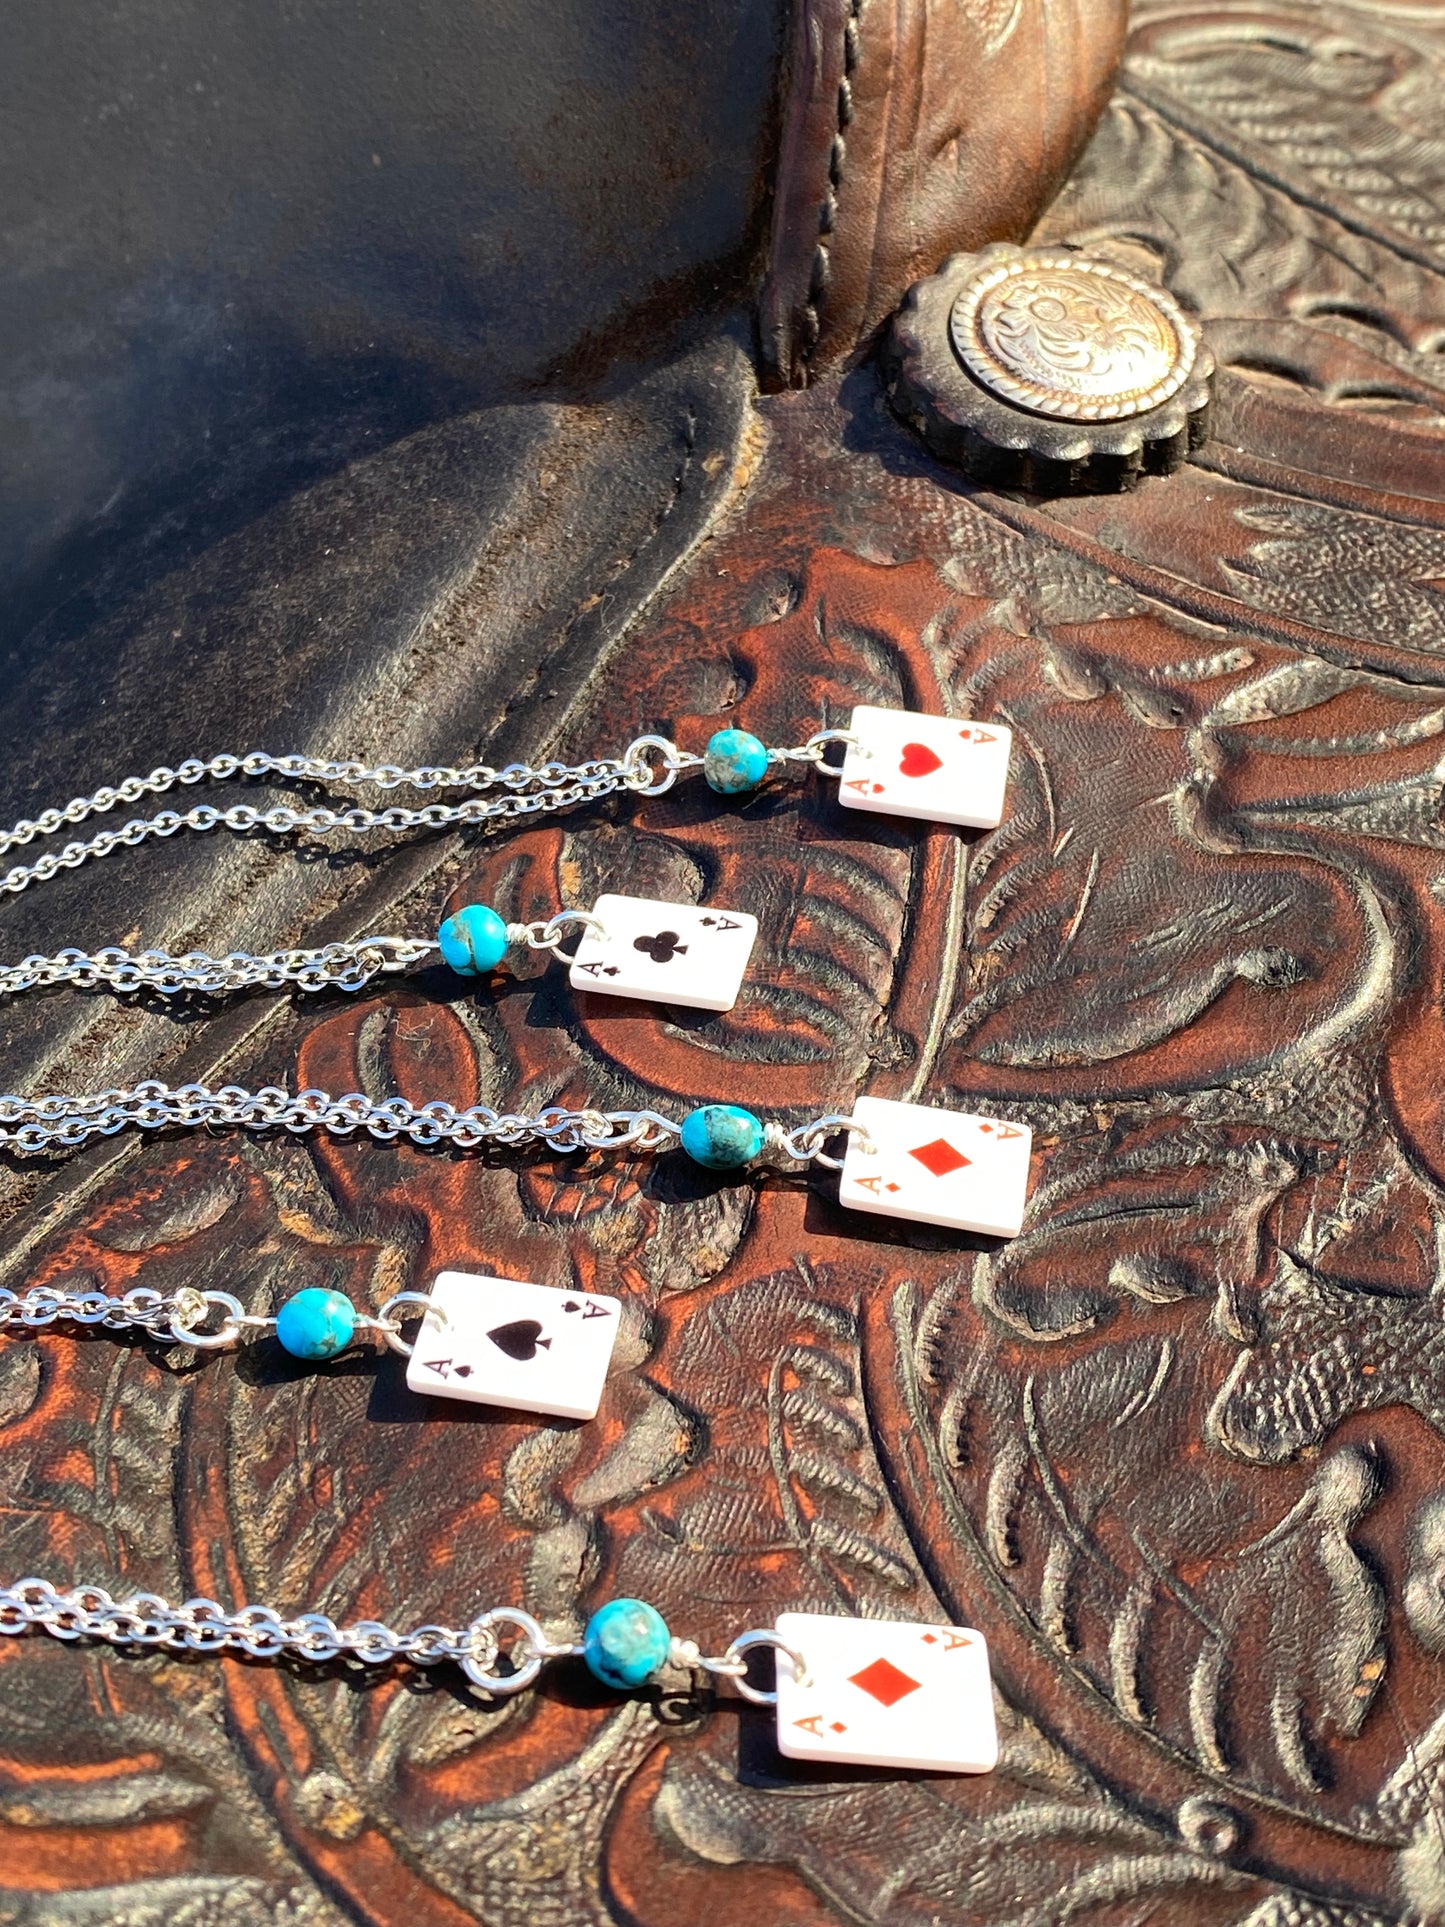 Turquoise Wild Card Necklaces